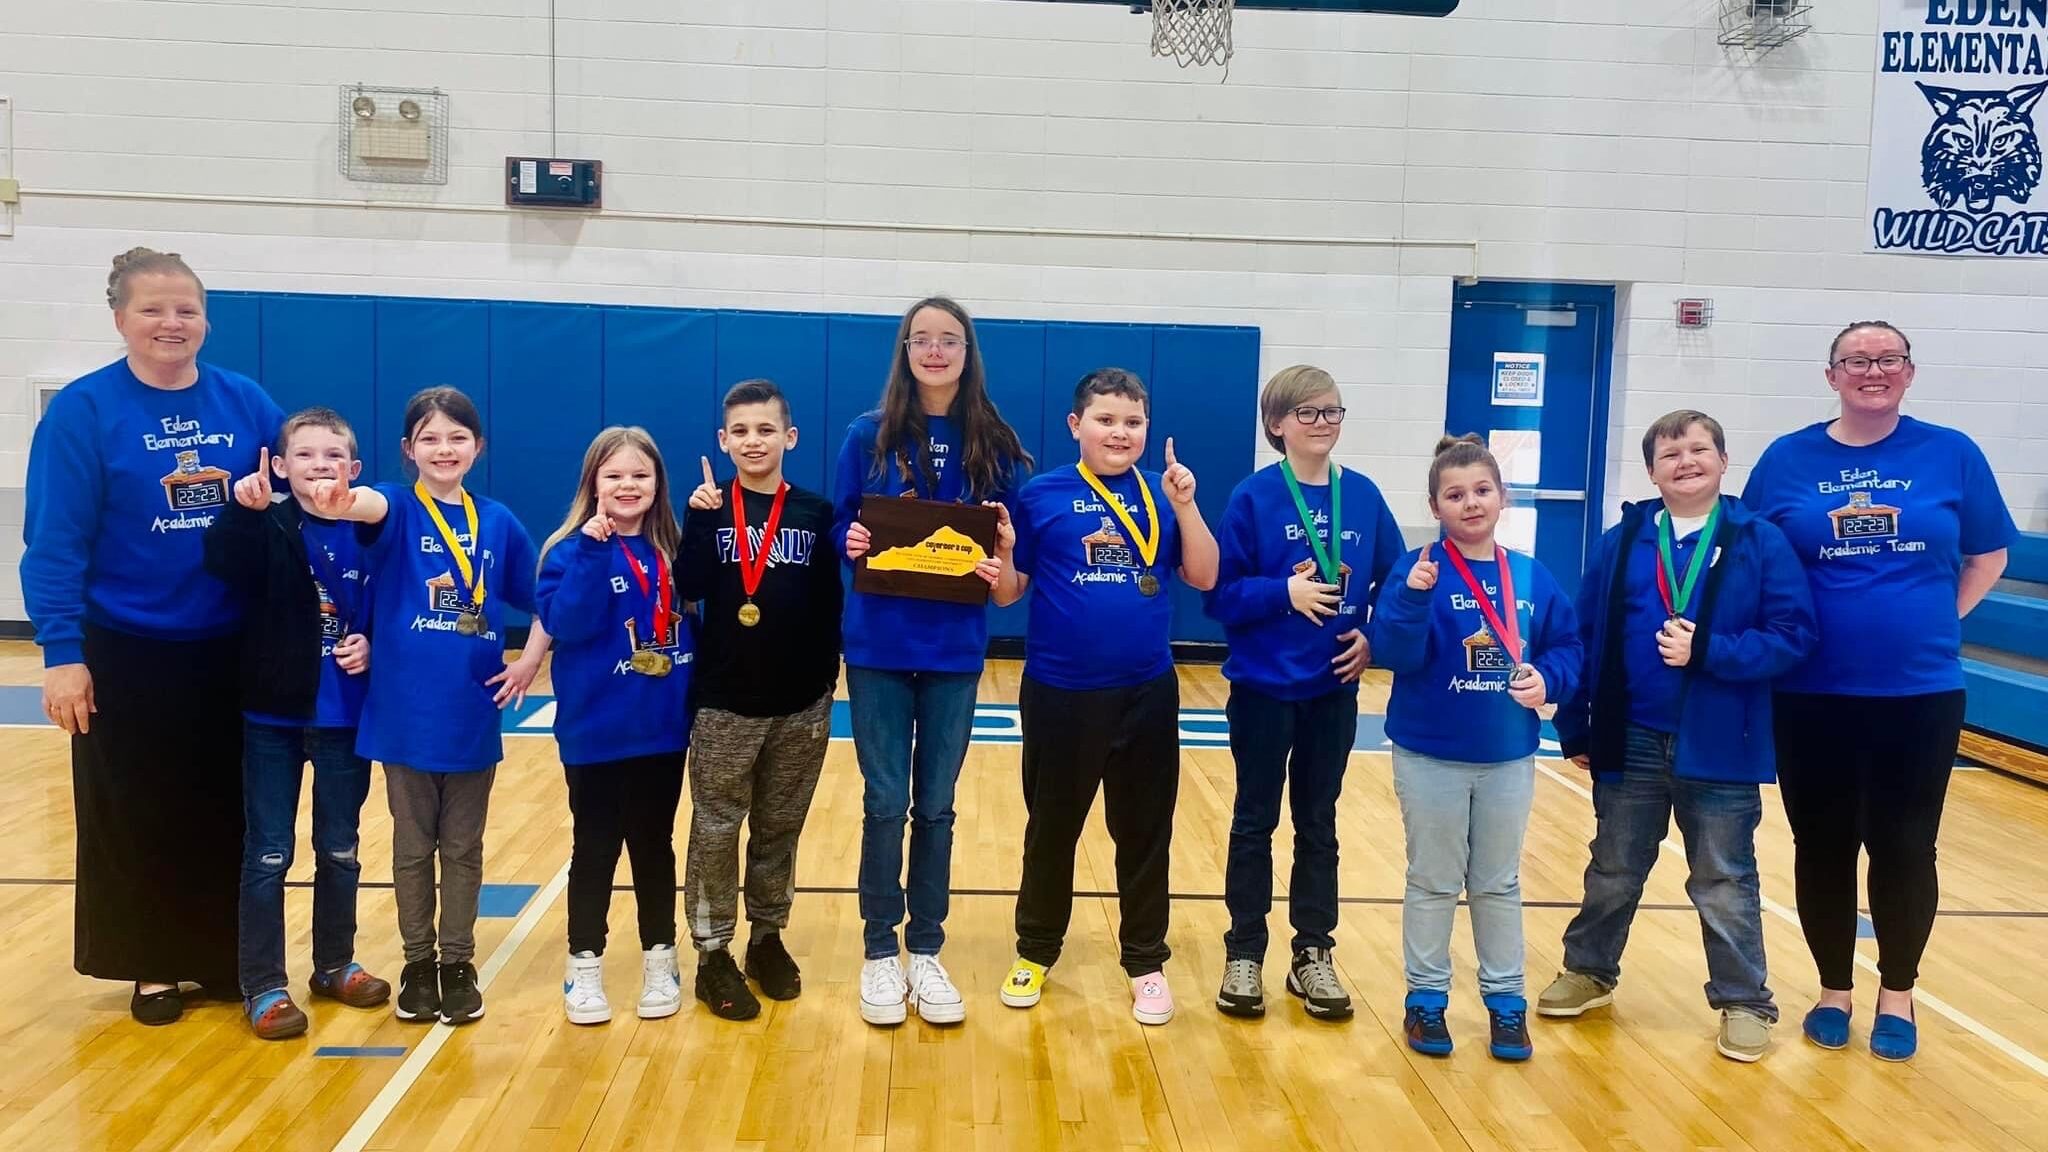 Eden wins District Governor’s Cup